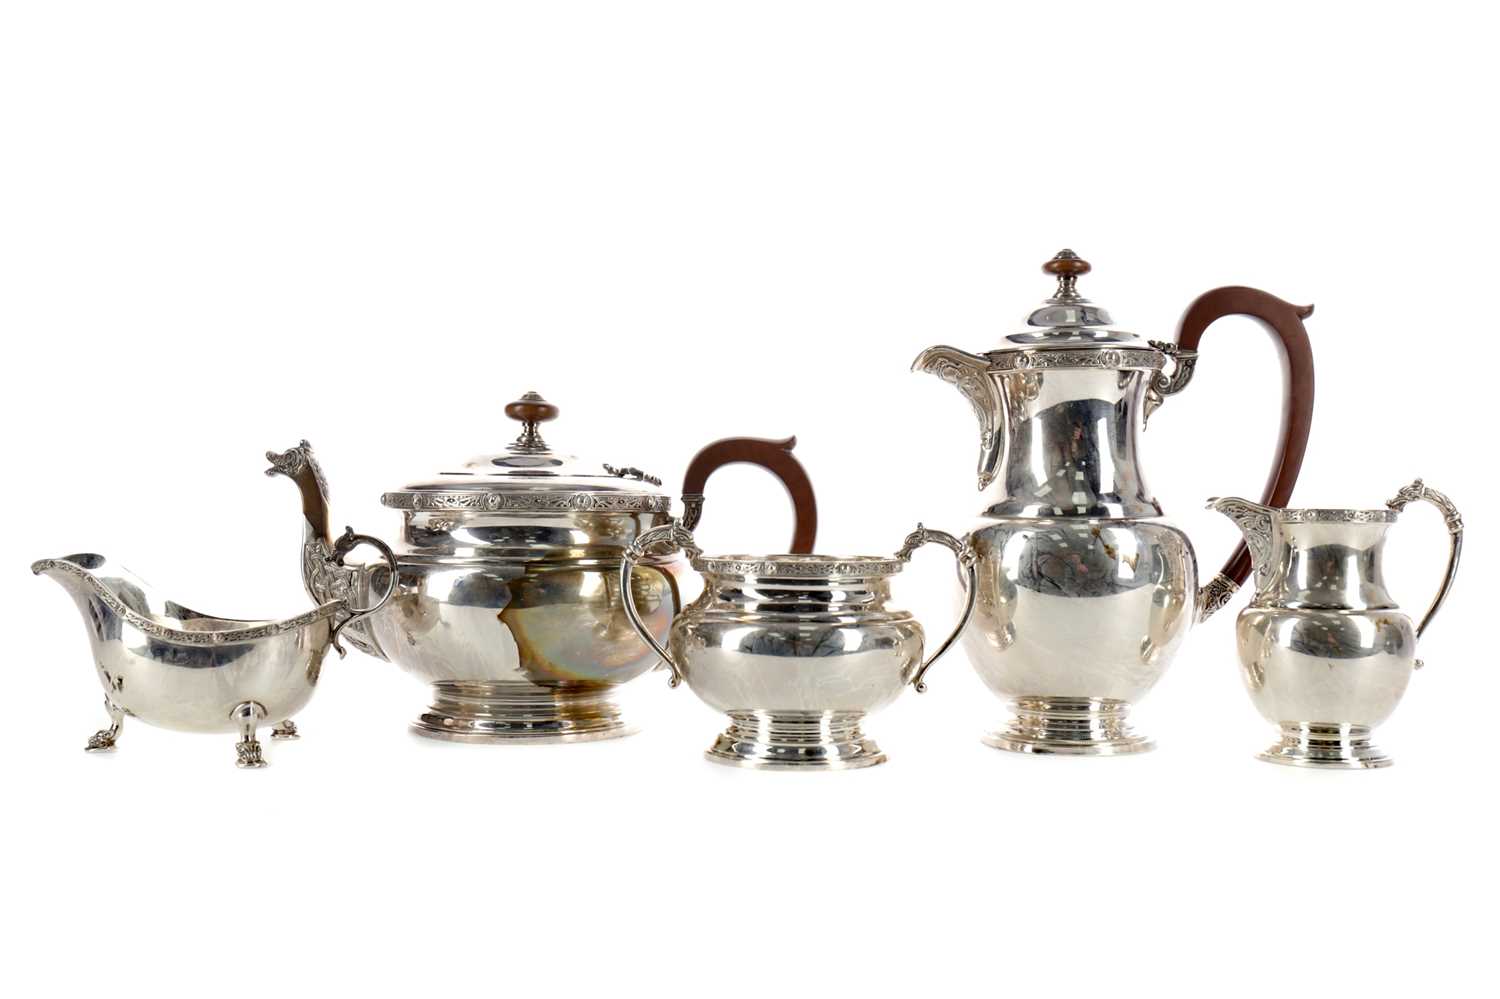 Lot 471 - A GEORGE VI SILVER FOUR-PIECE TEA AND COFFEE SERVICE, ALONG WITH A MATCHED SAUCE BOAT